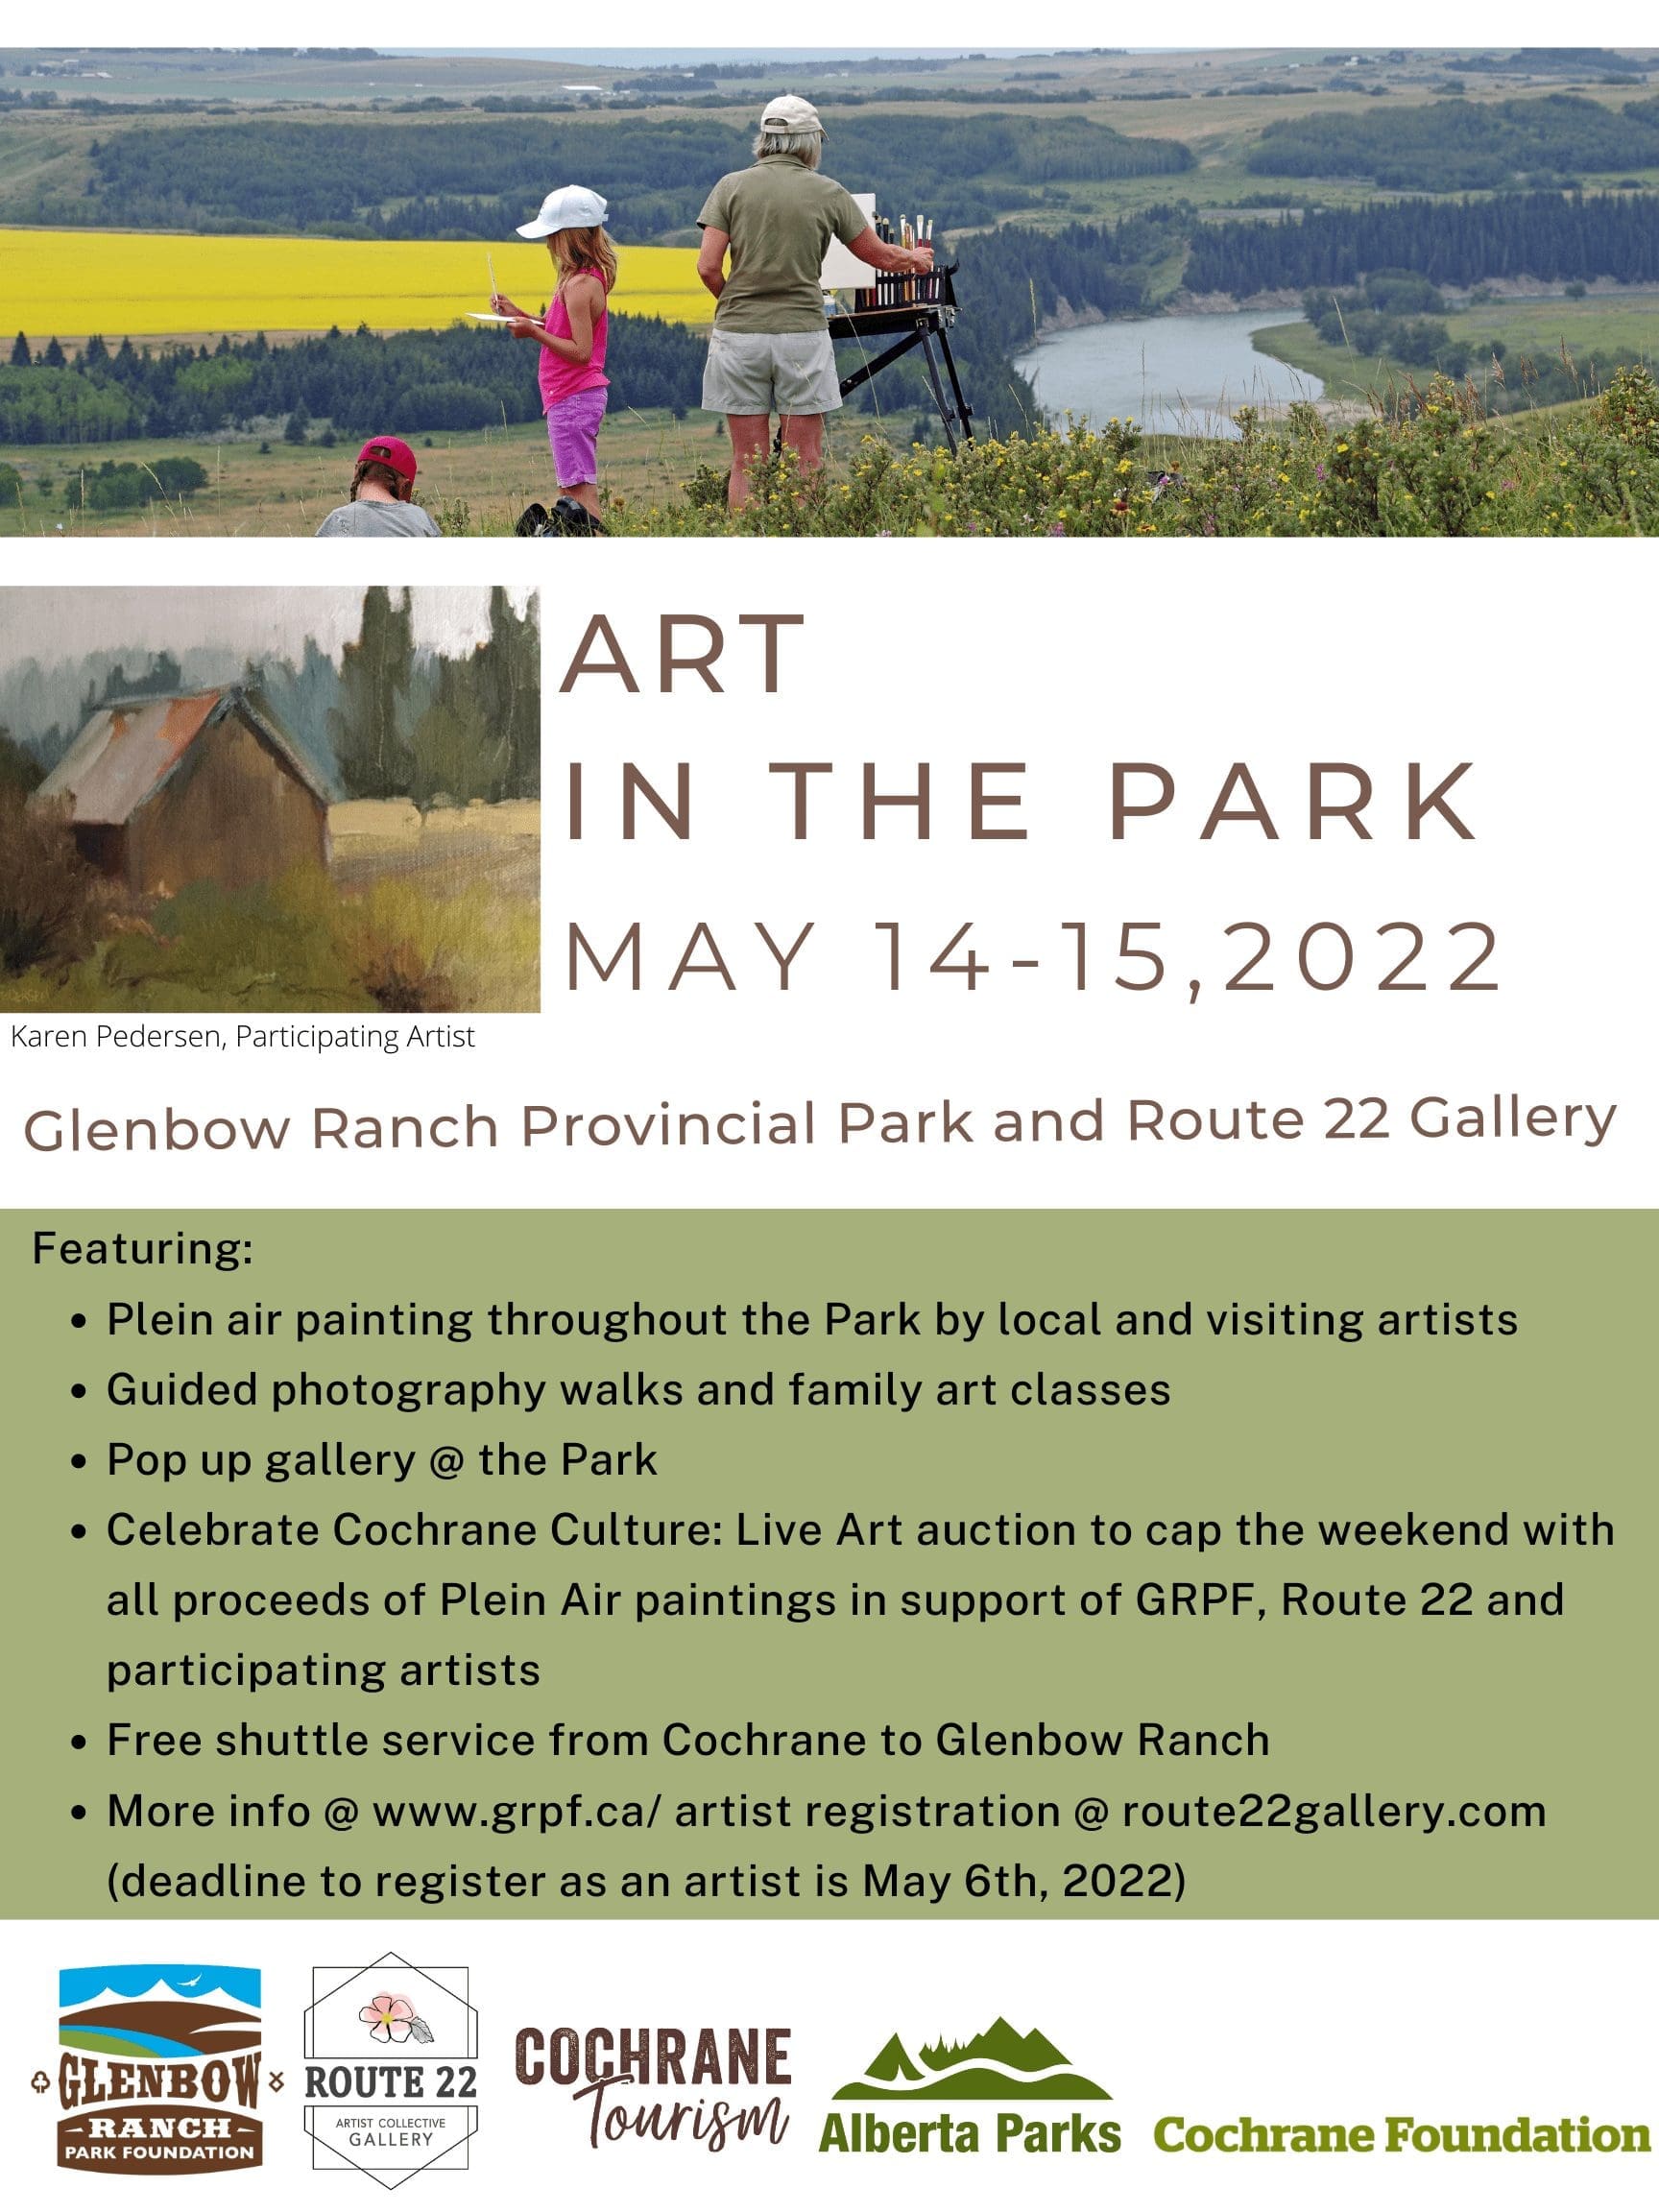 painting, photography walks, family art classes and more